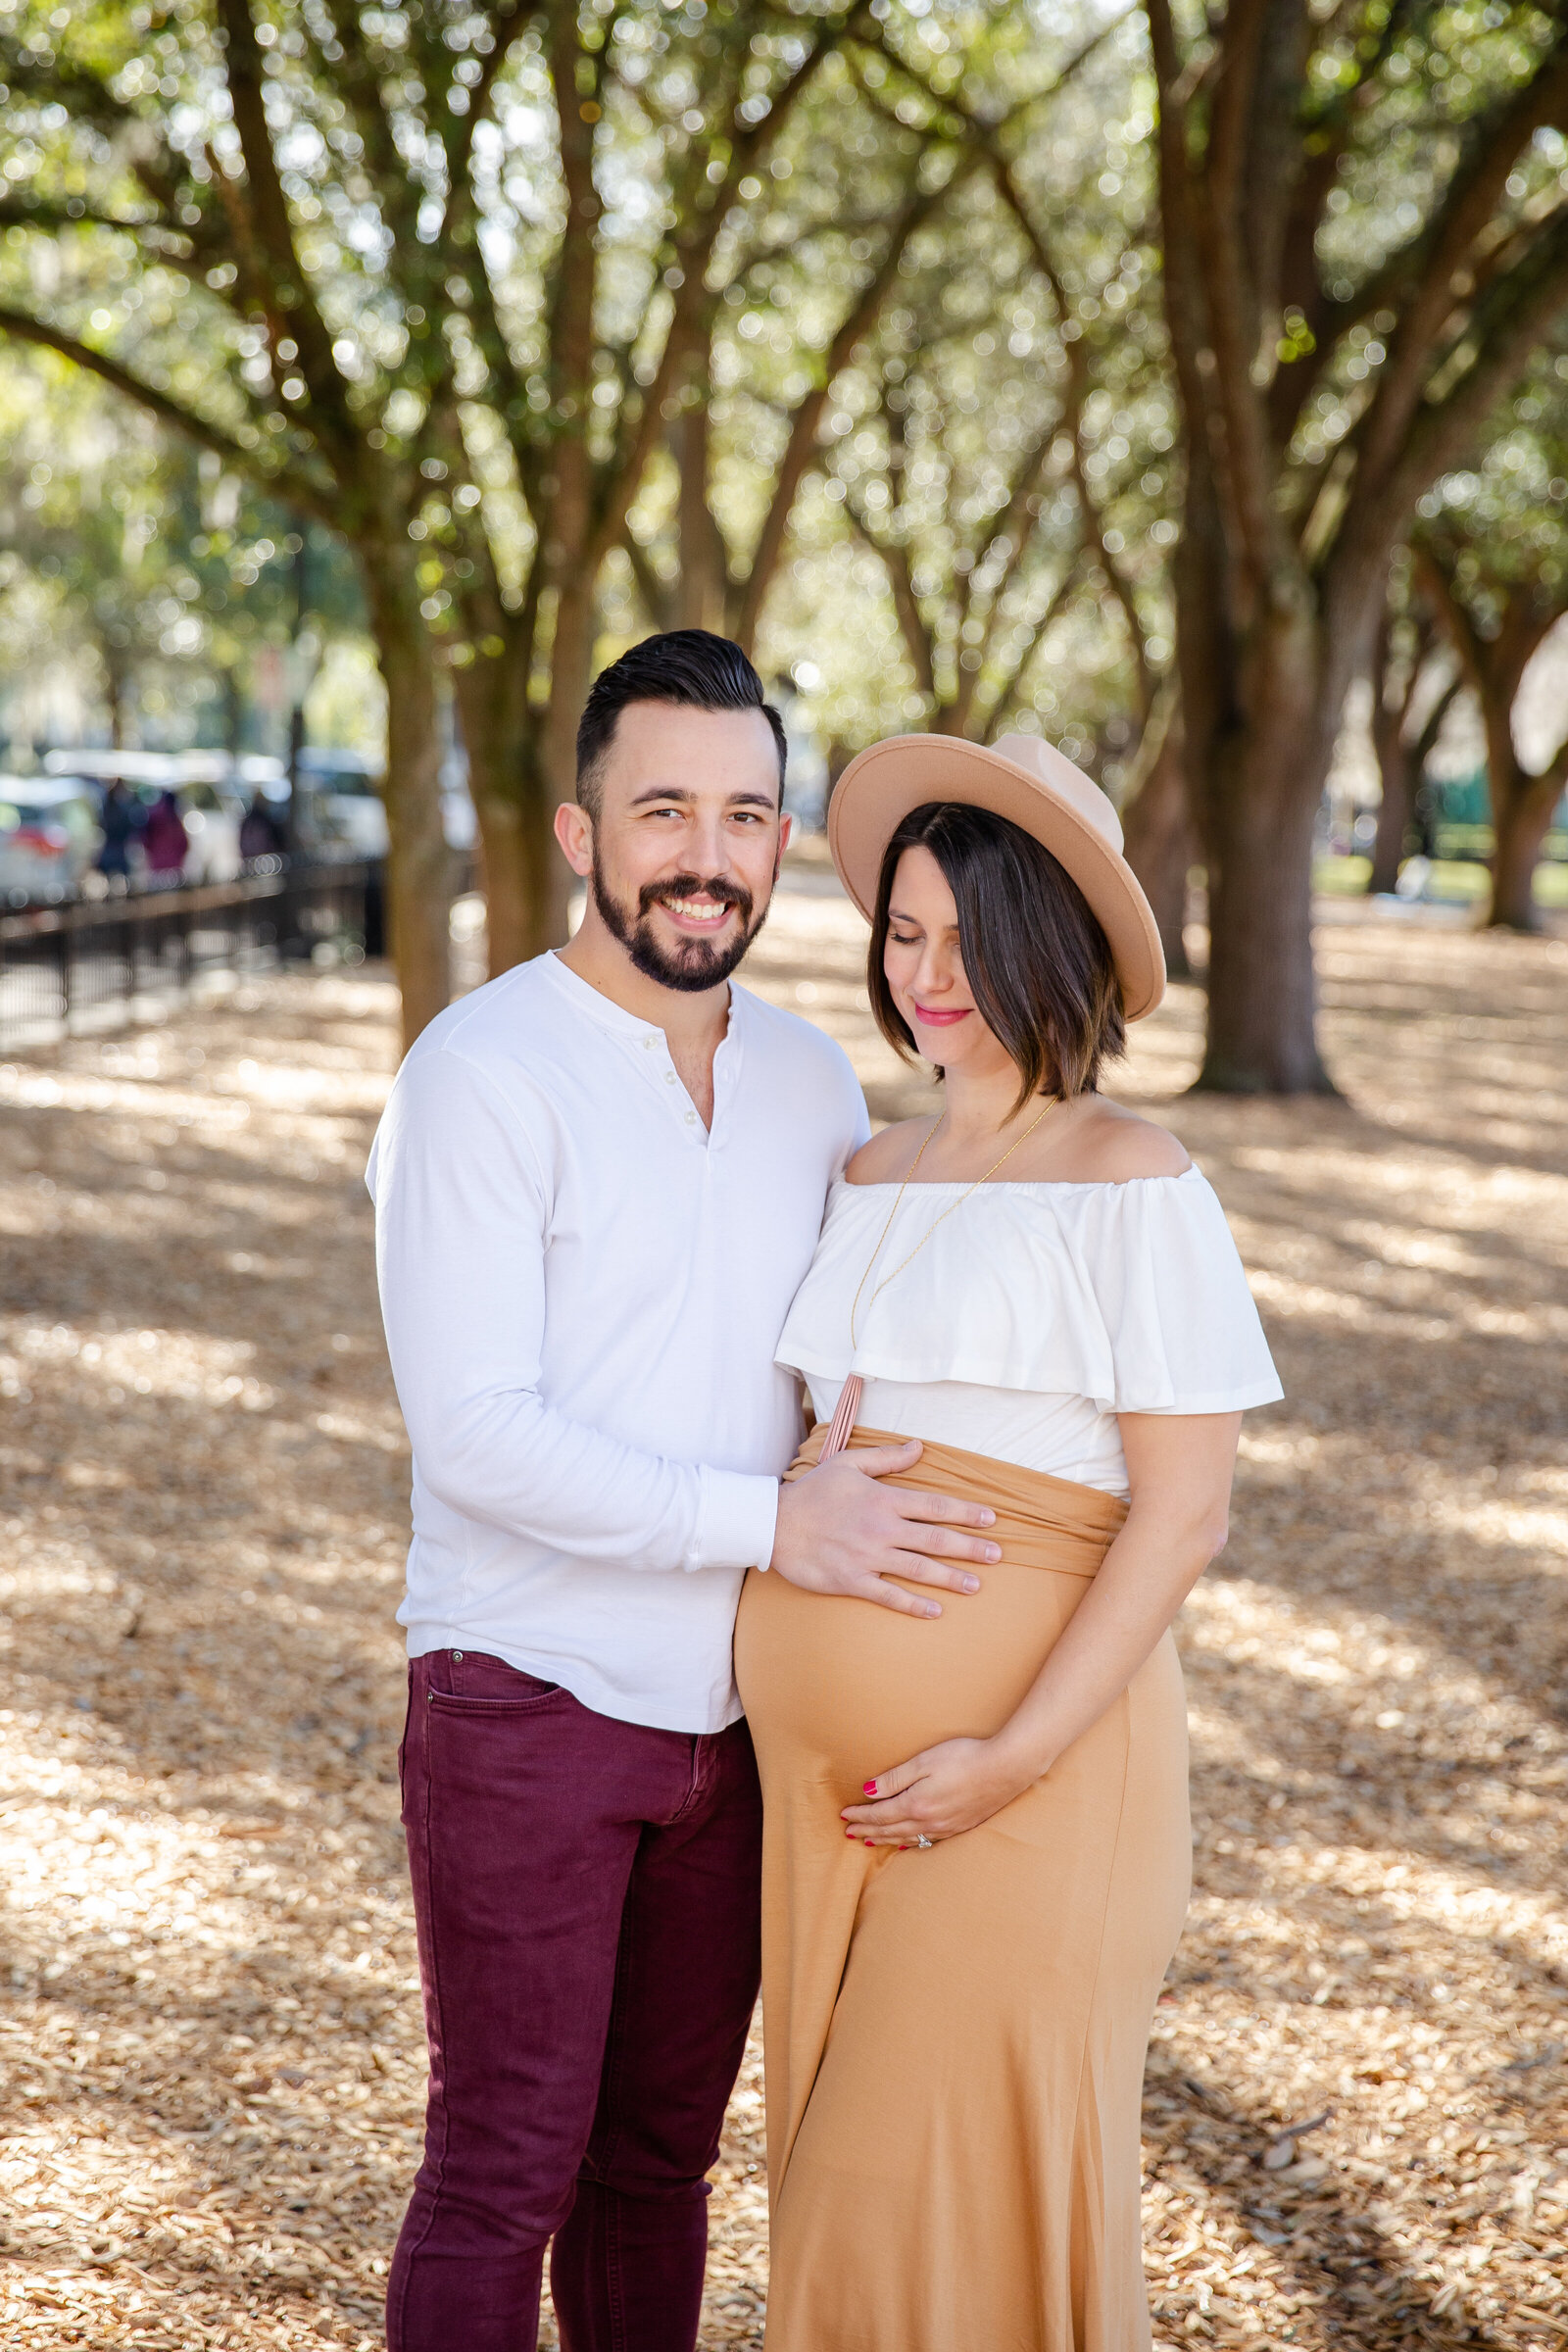 Florida portrait photographer for expecting mothers Riley James.